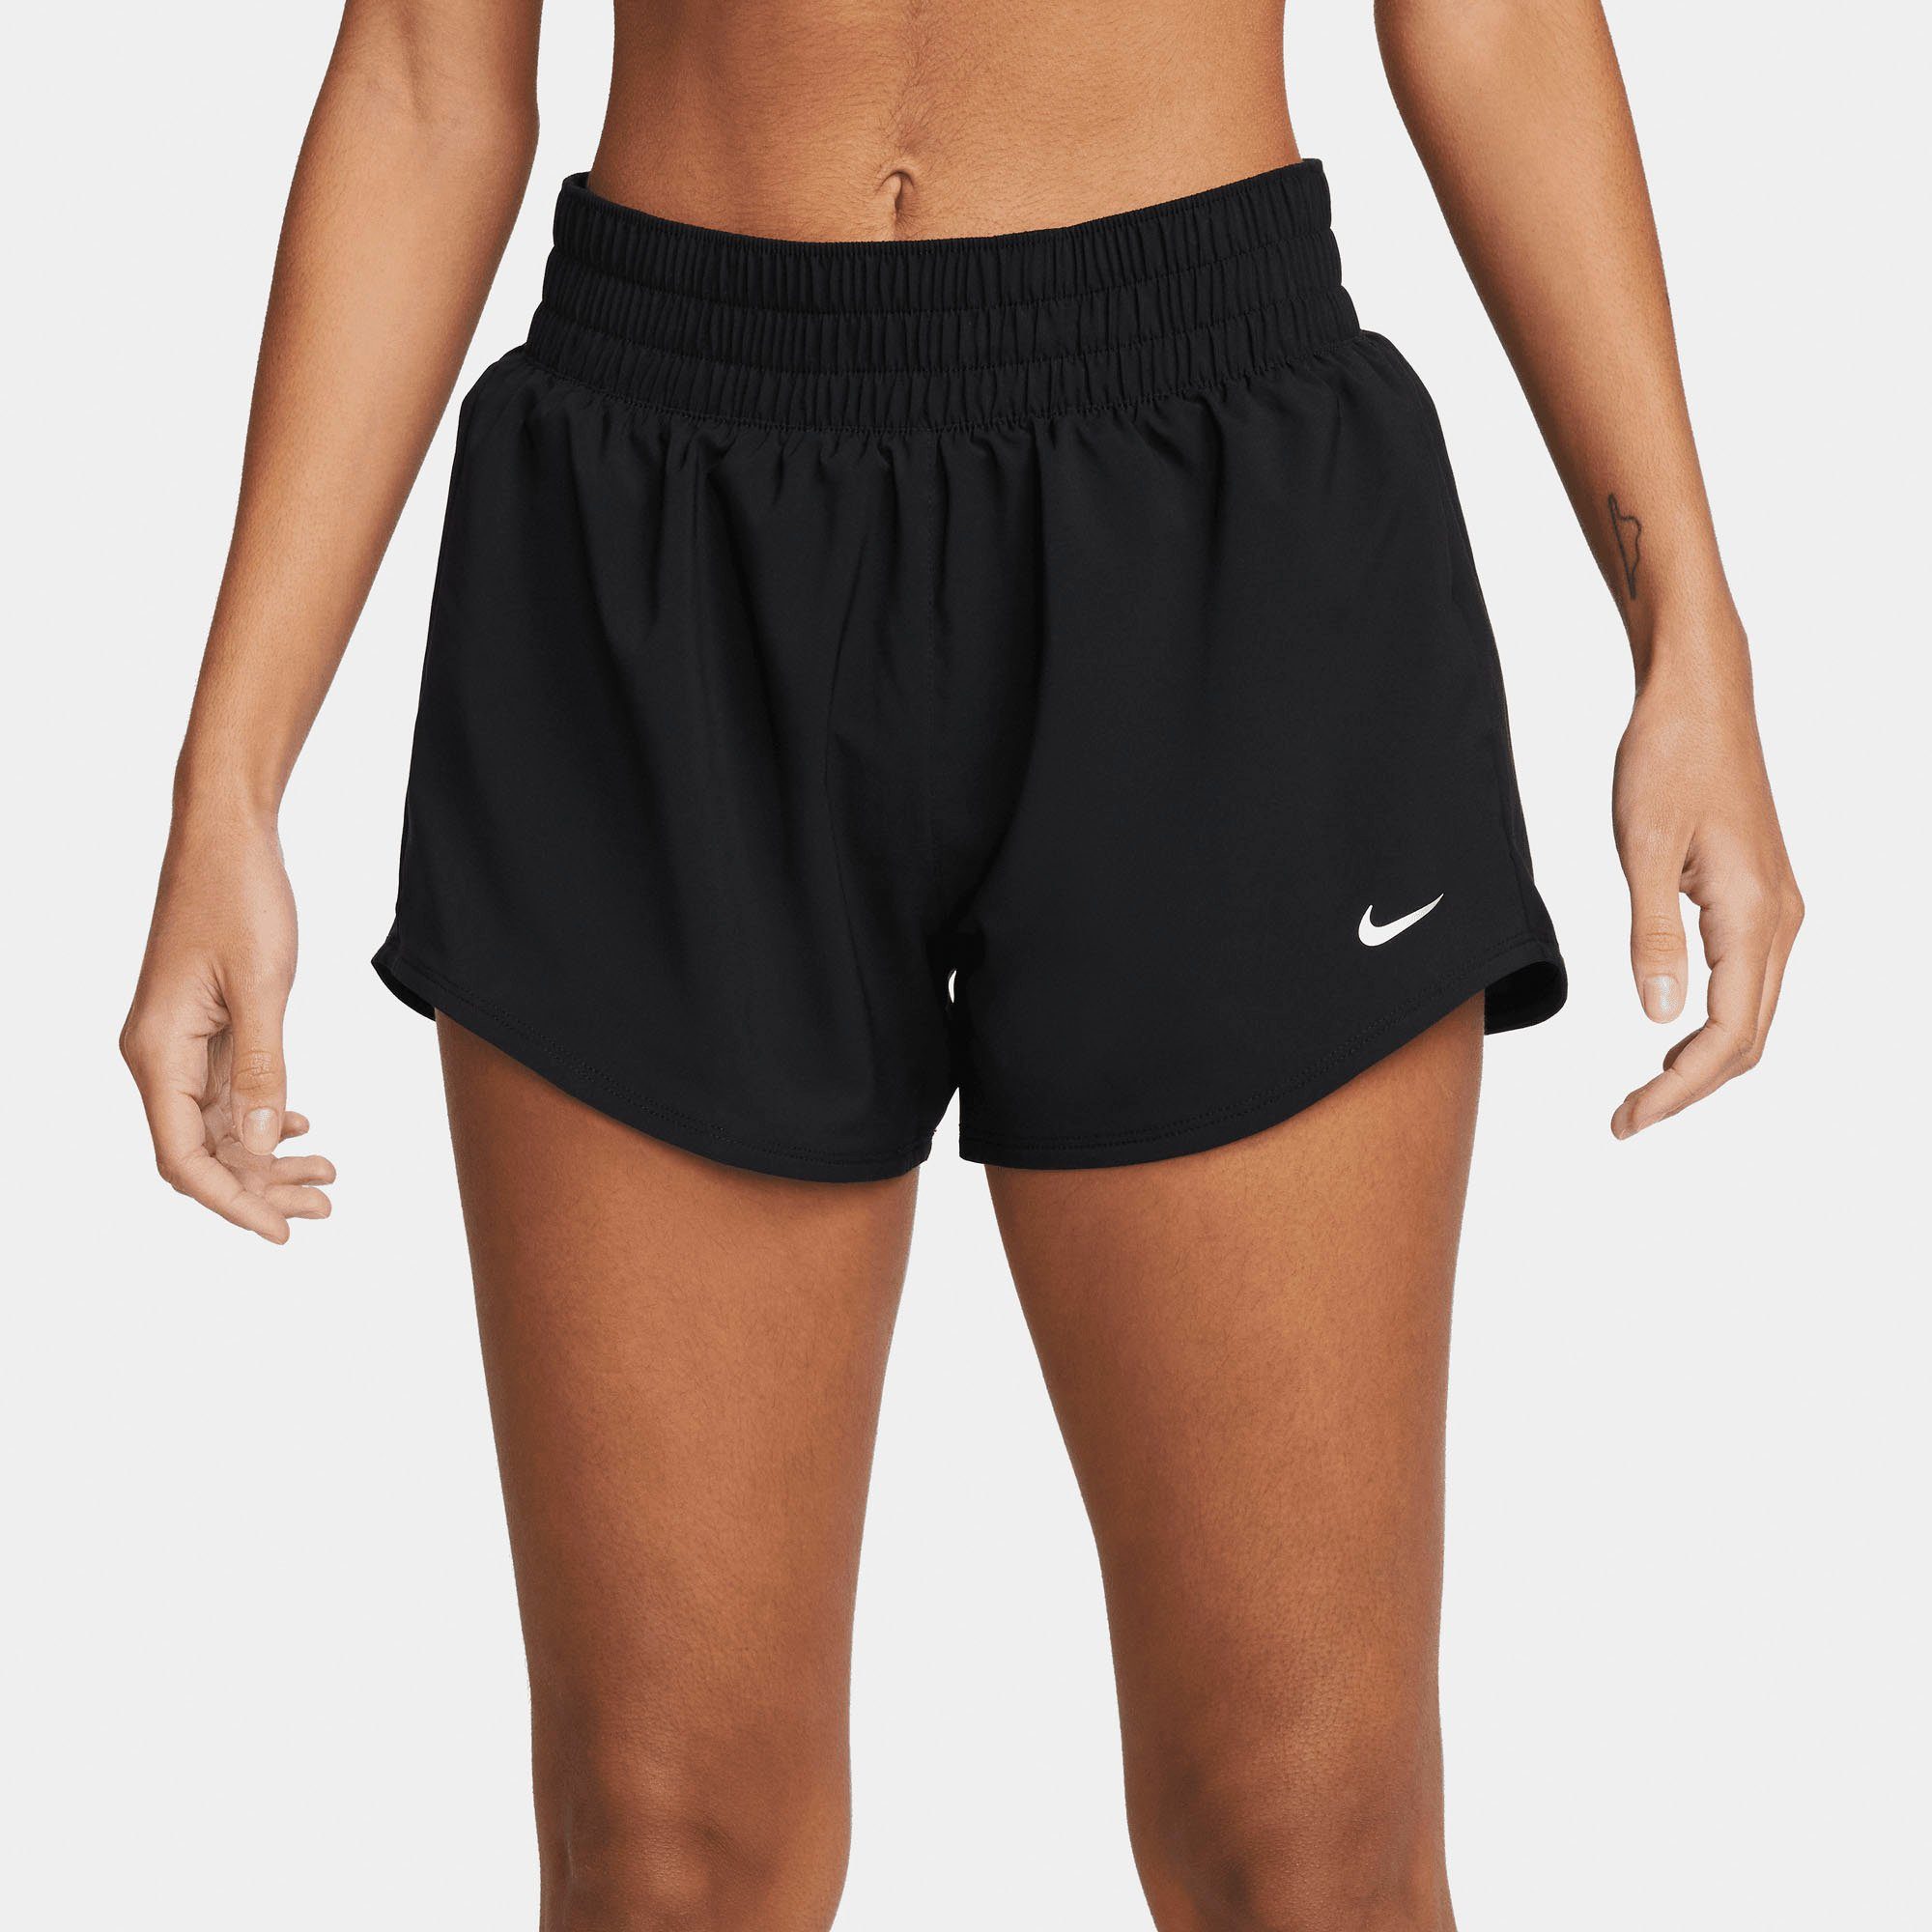 WOMEN'S BRIEF-LINED SHORTS BLACK/REFLECTIVE DRI-FIT ONE Trainingsshorts Nike SILV MID-RISE